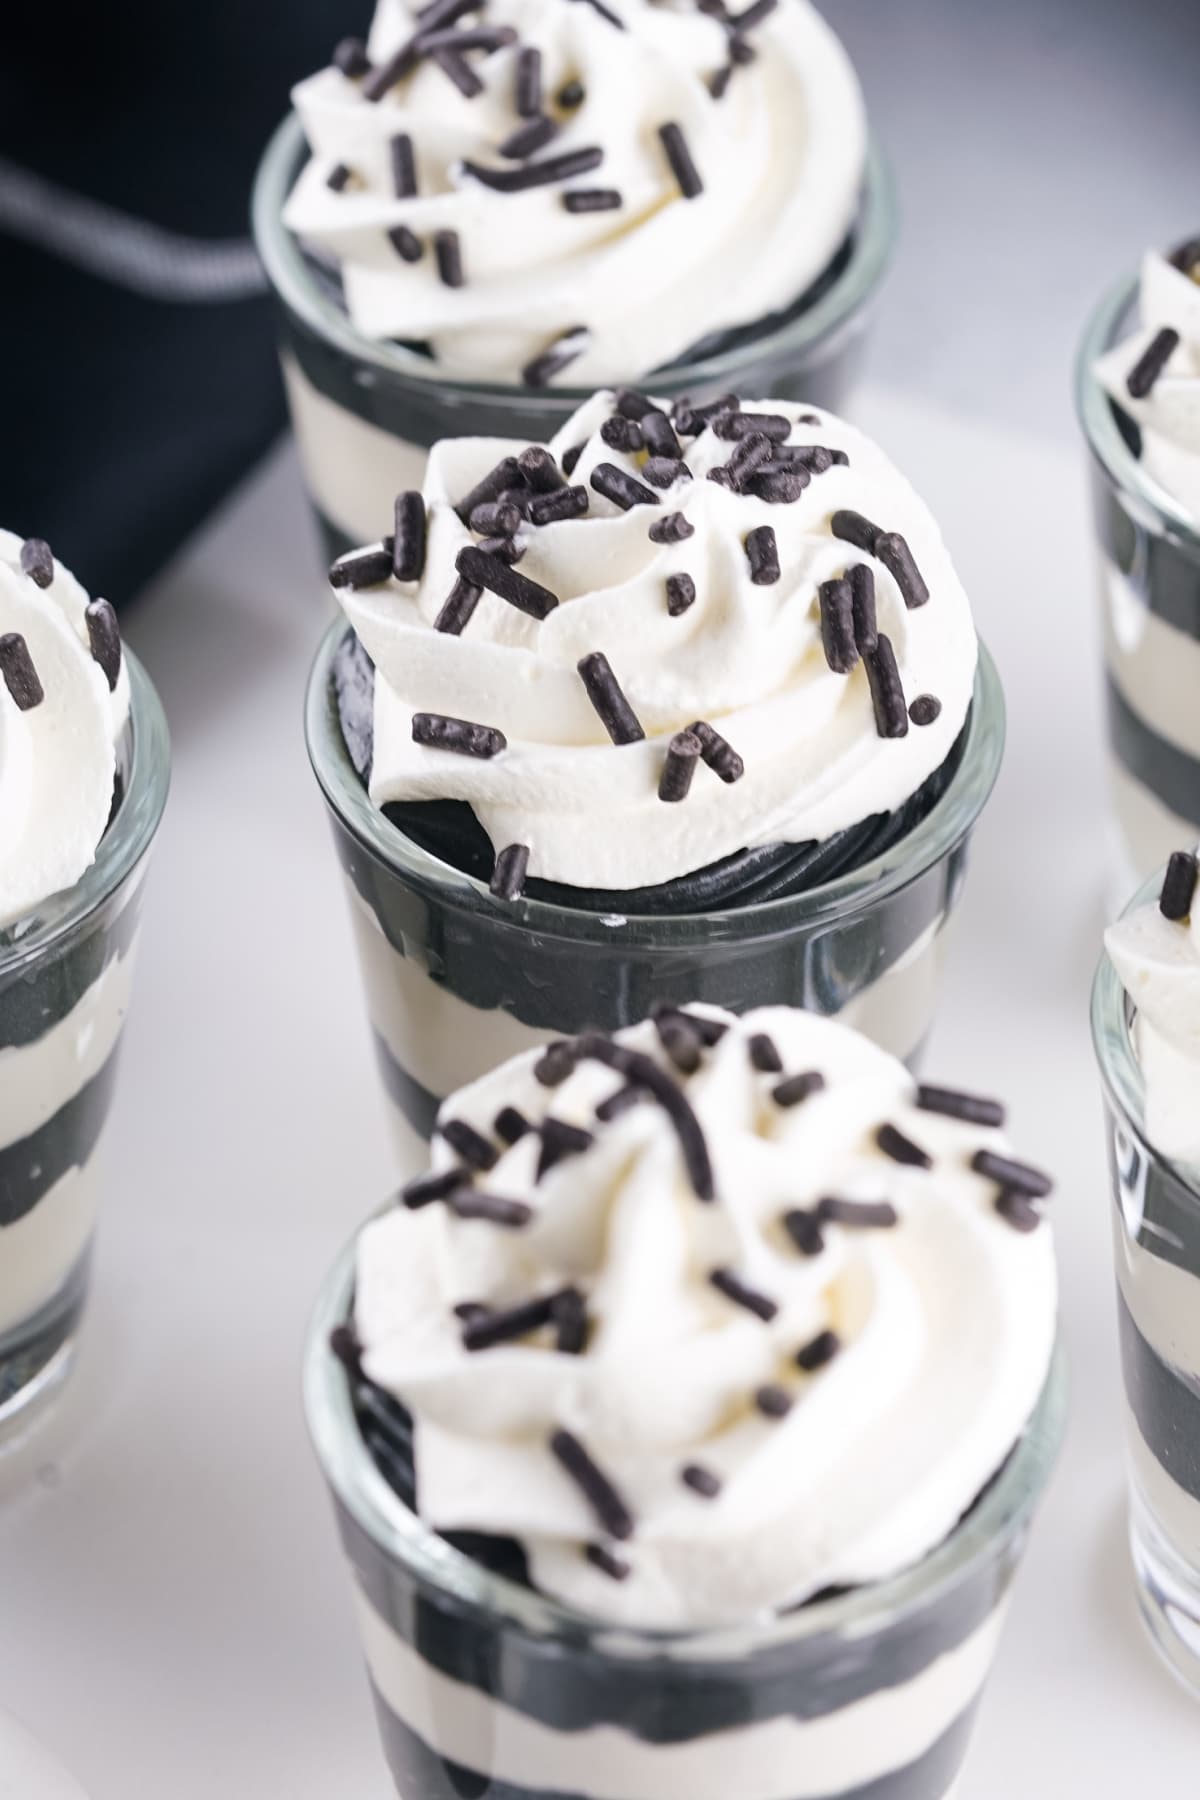 Halloween pudding shots with whipped cream and sprinkles